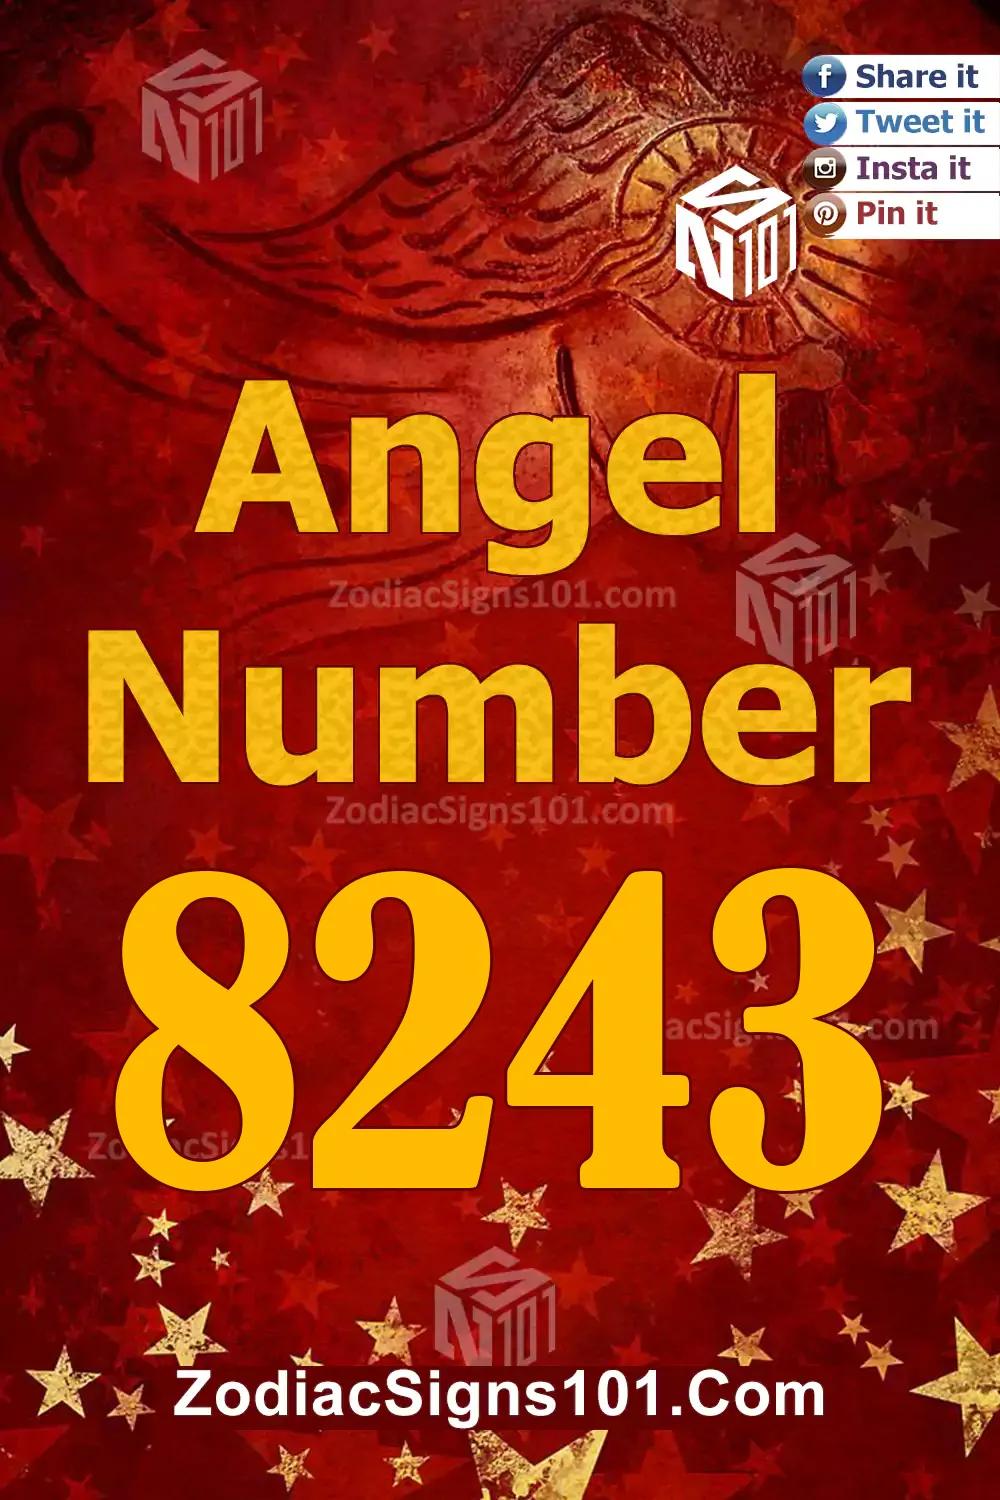 8243 Angel Number Meaning